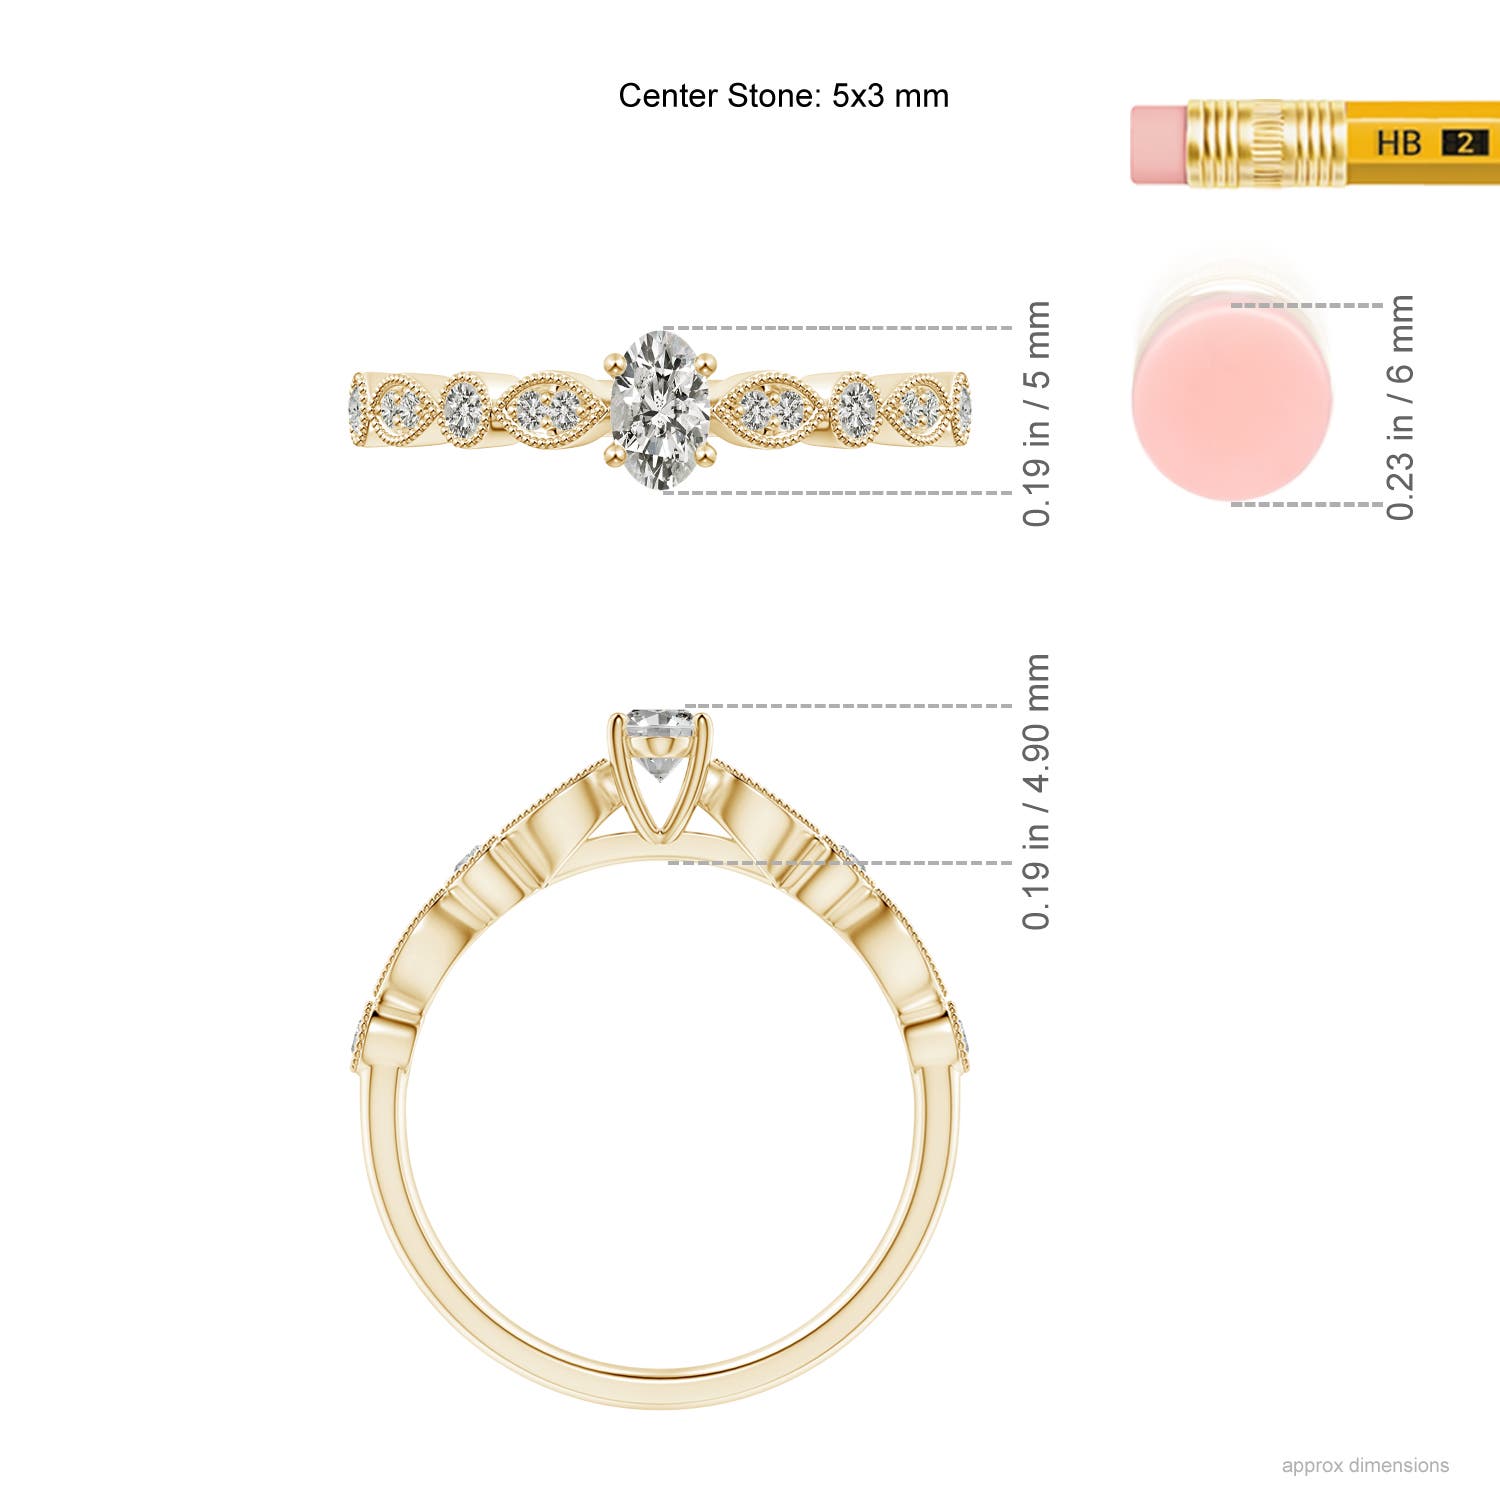 K, I3 / 0.38 CT / 14 KT Yellow Gold